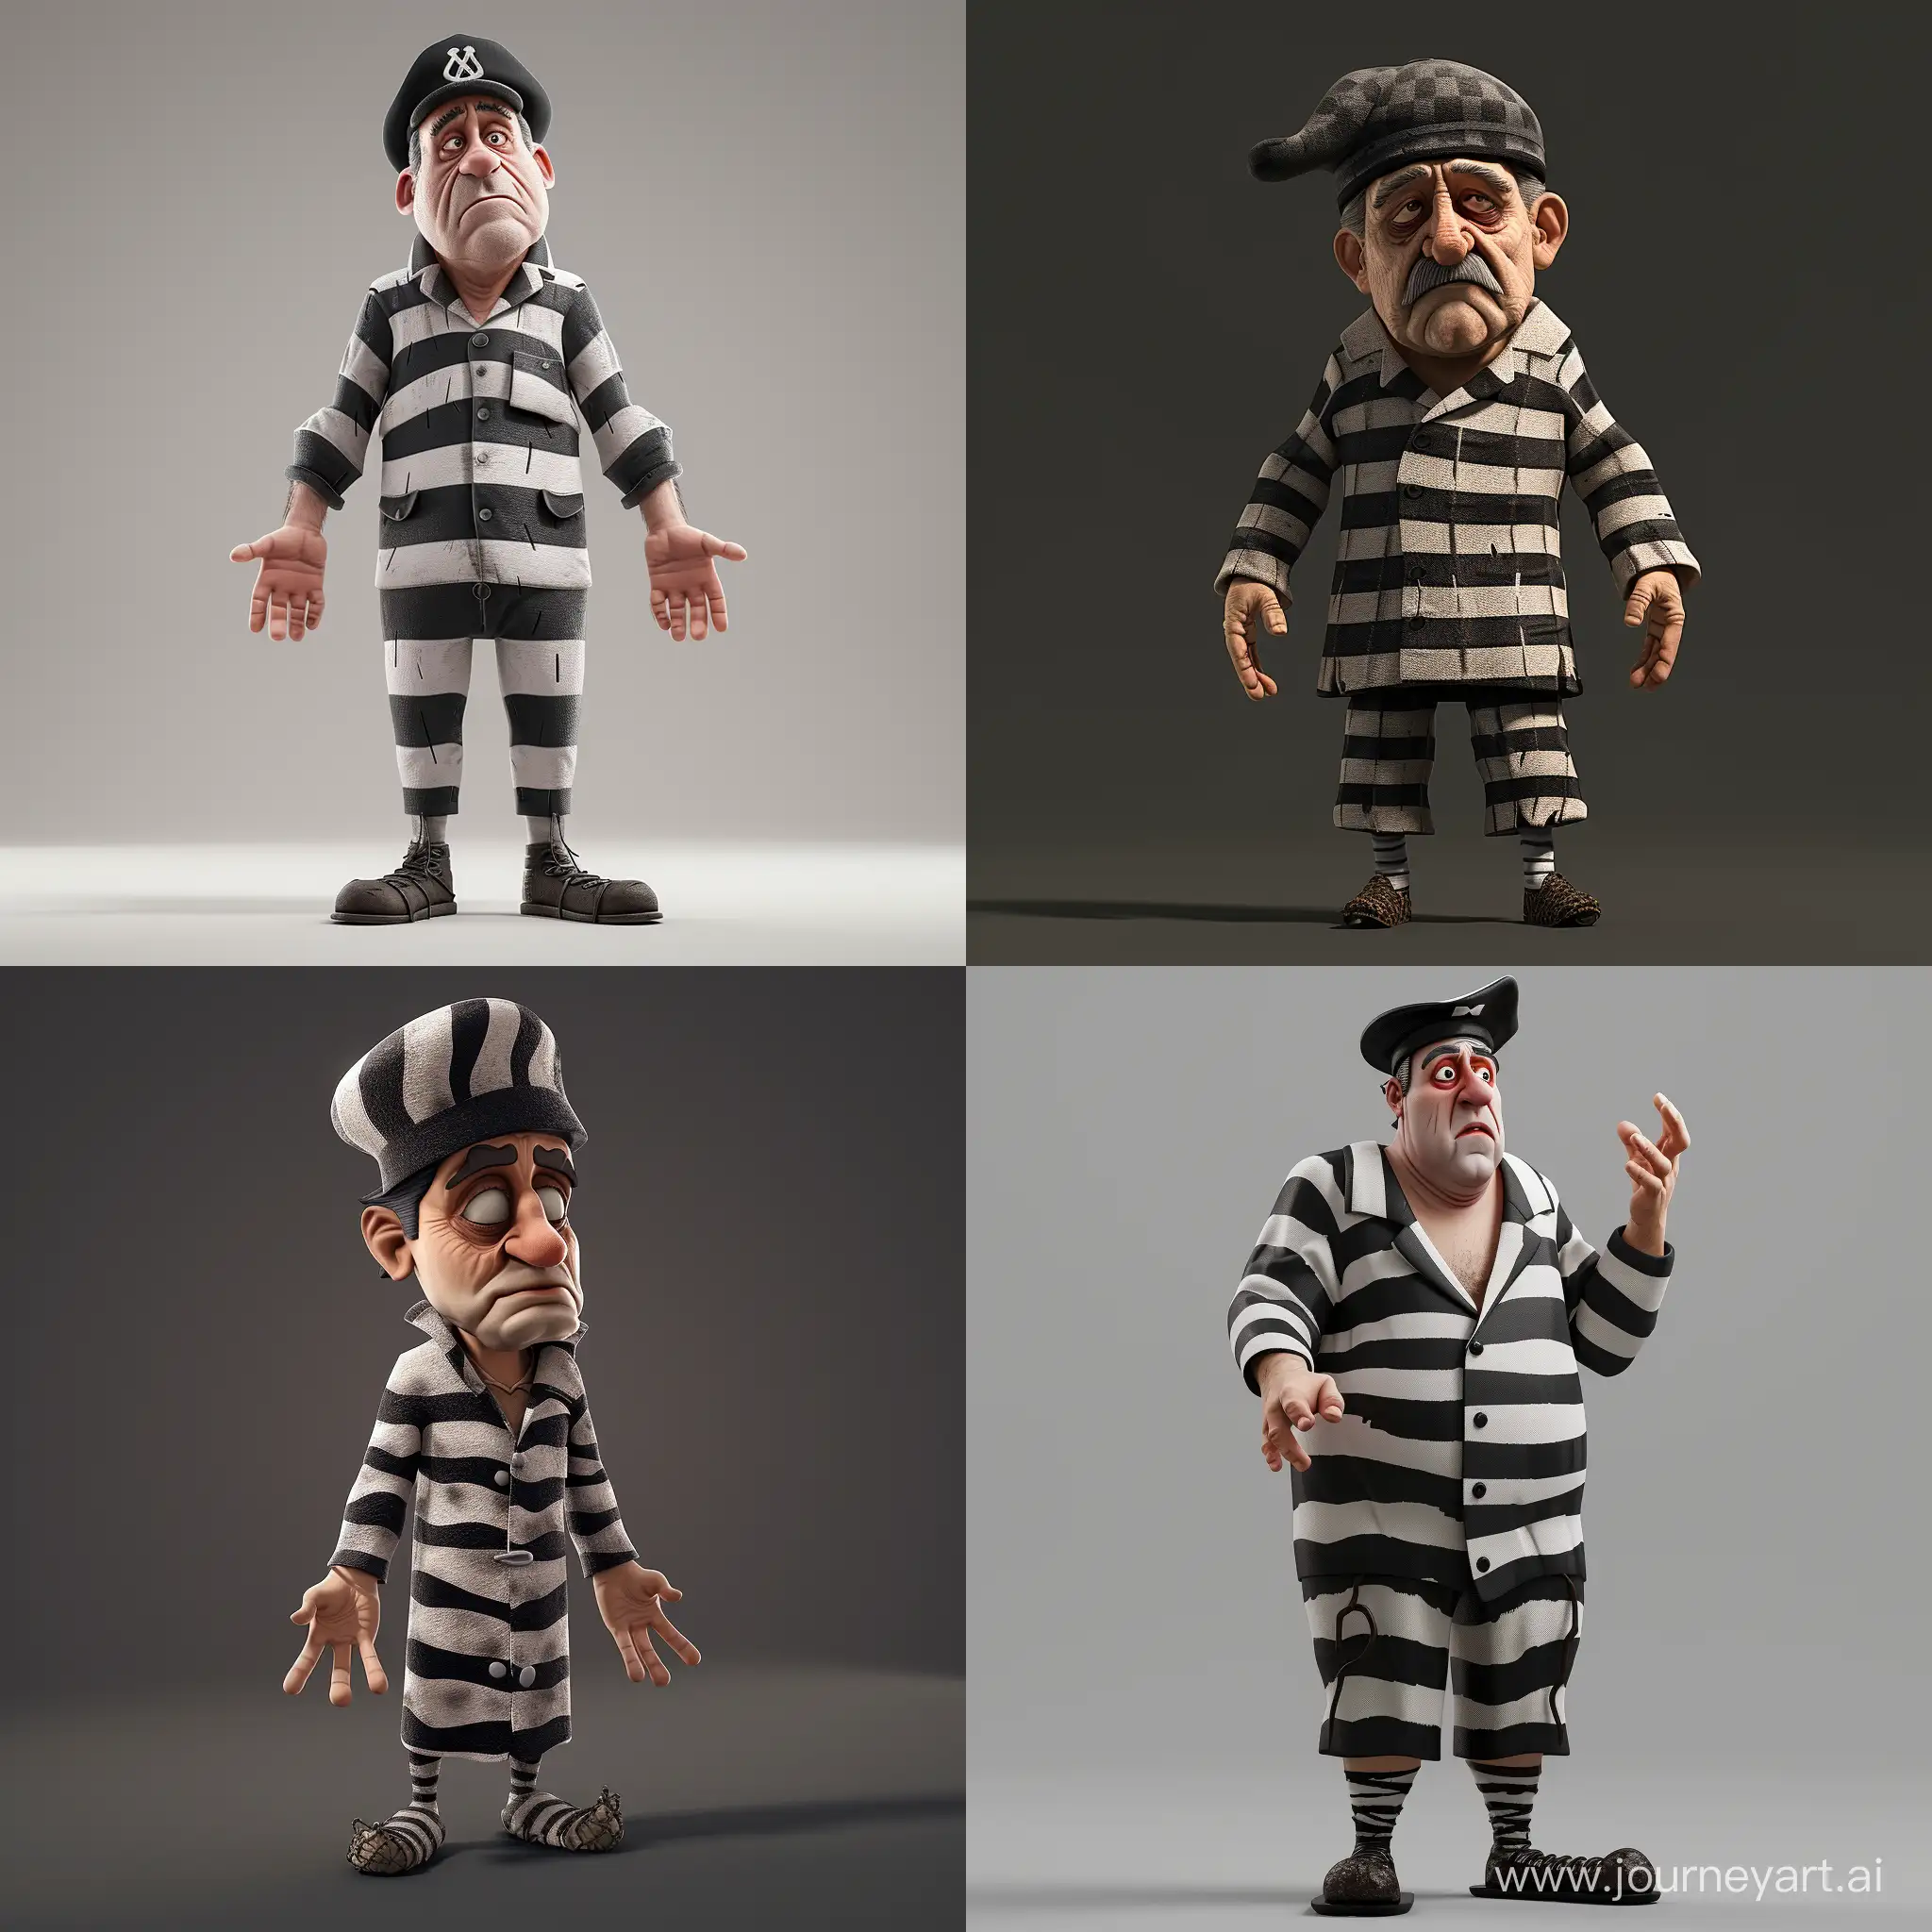 Thoughtful-MiddleAged-Man-in-Striped-Prisoner-Attire-3D-Cartoon-Style